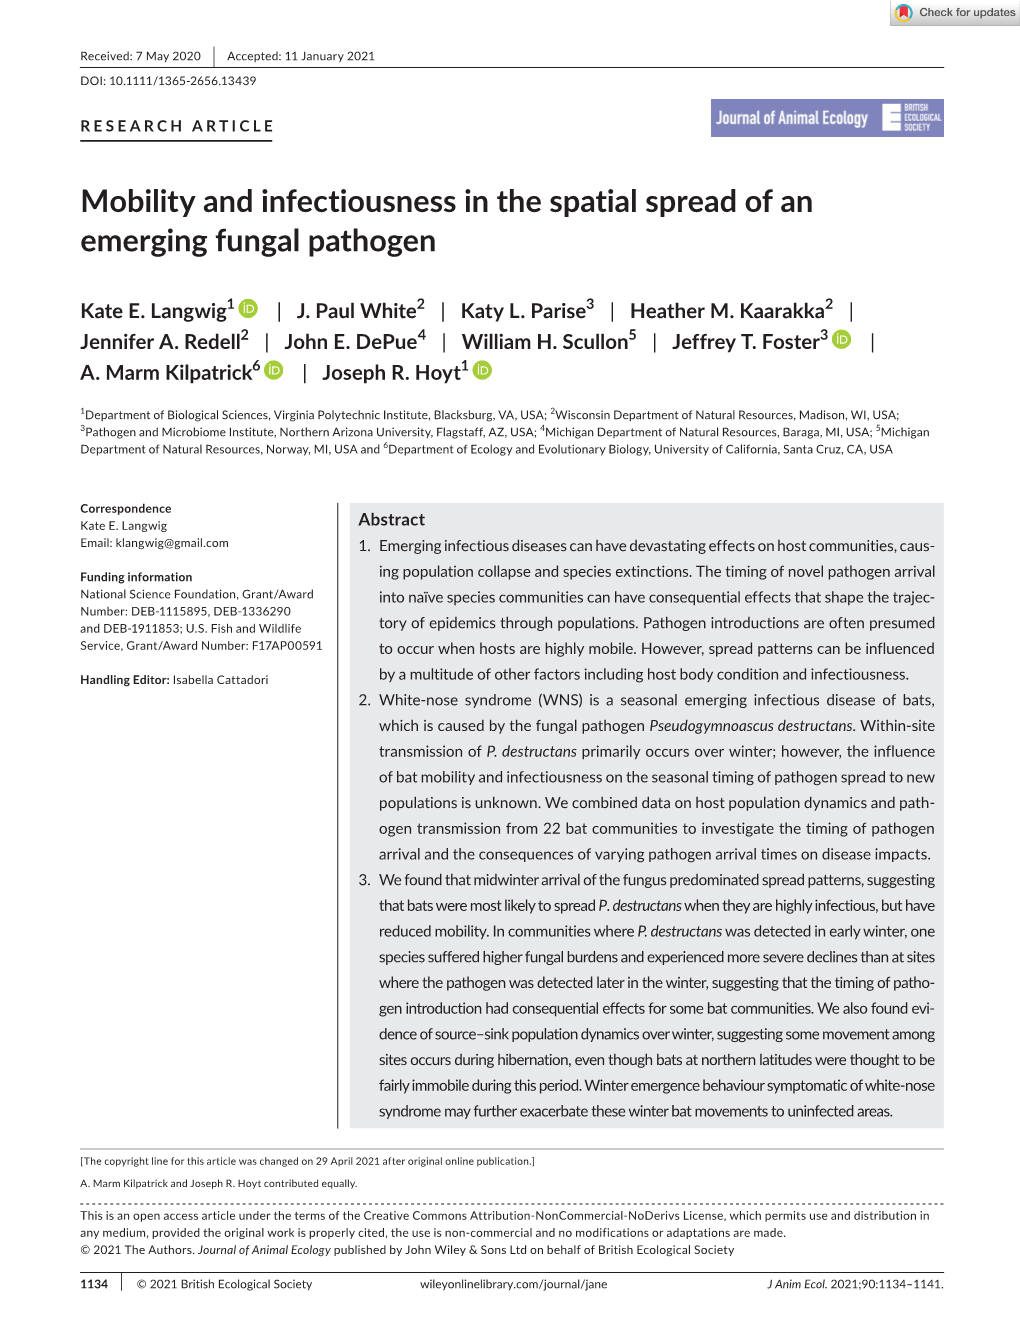 Mobility and Infectiousness in the Spatial Spread of an Emerging Fungal Pathogen